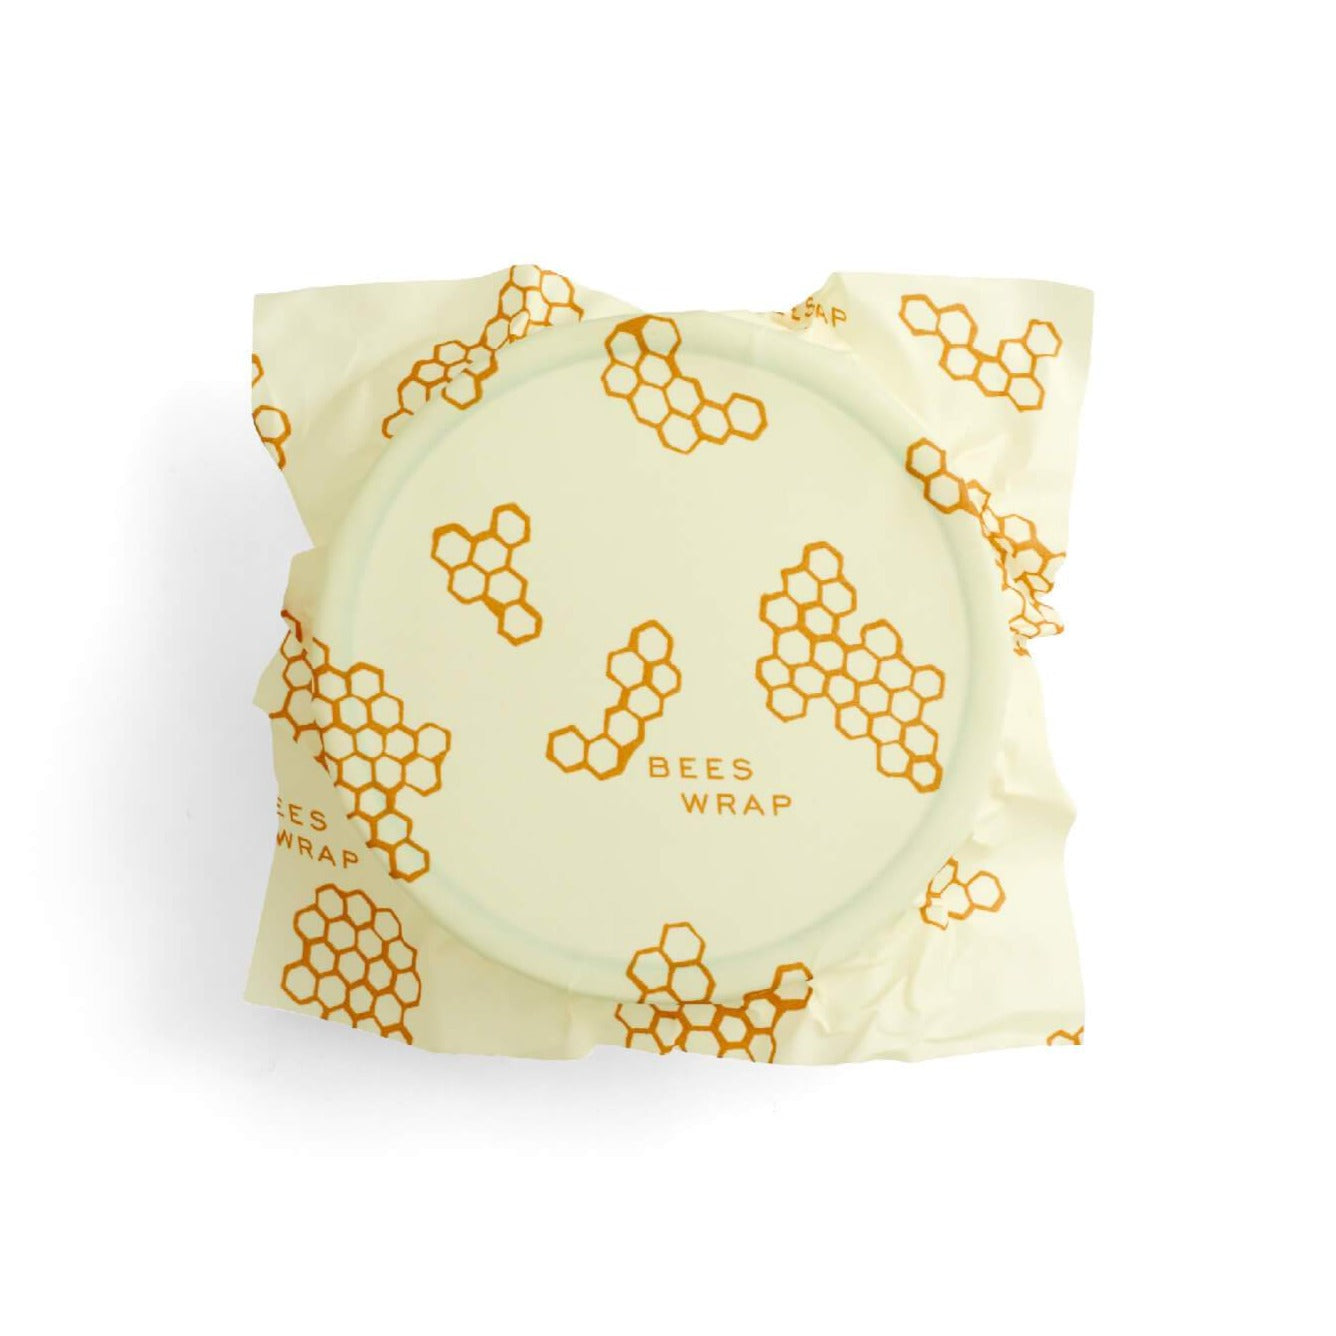 beeswax wrap over container bowl